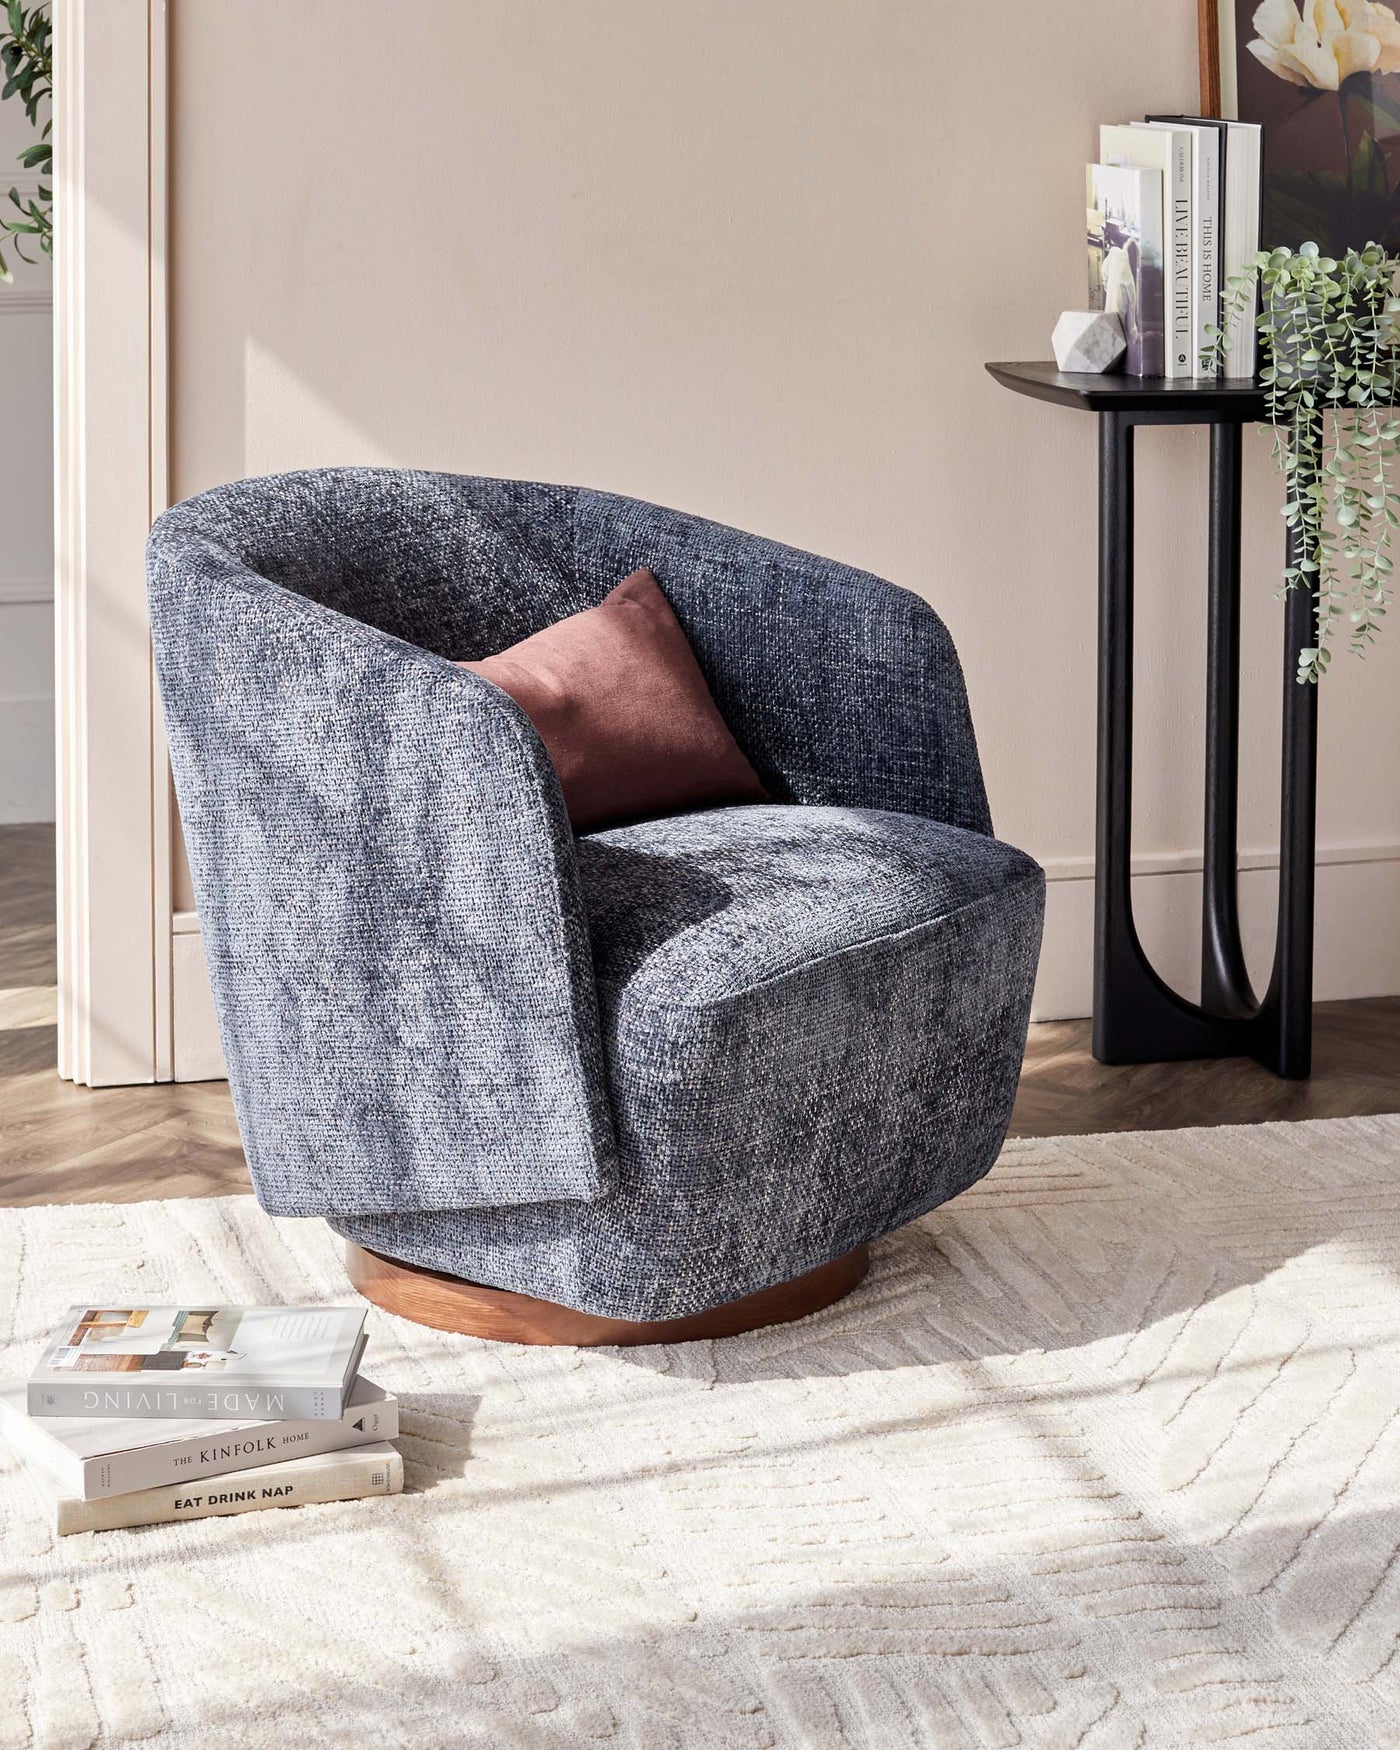 Contemporary rounded armchair with textured blue upholstery and a smooth wooden base, paired with a modern black circular side table with slender legs, holding books and decorative items, positioned on a neutral-toned textured rug.